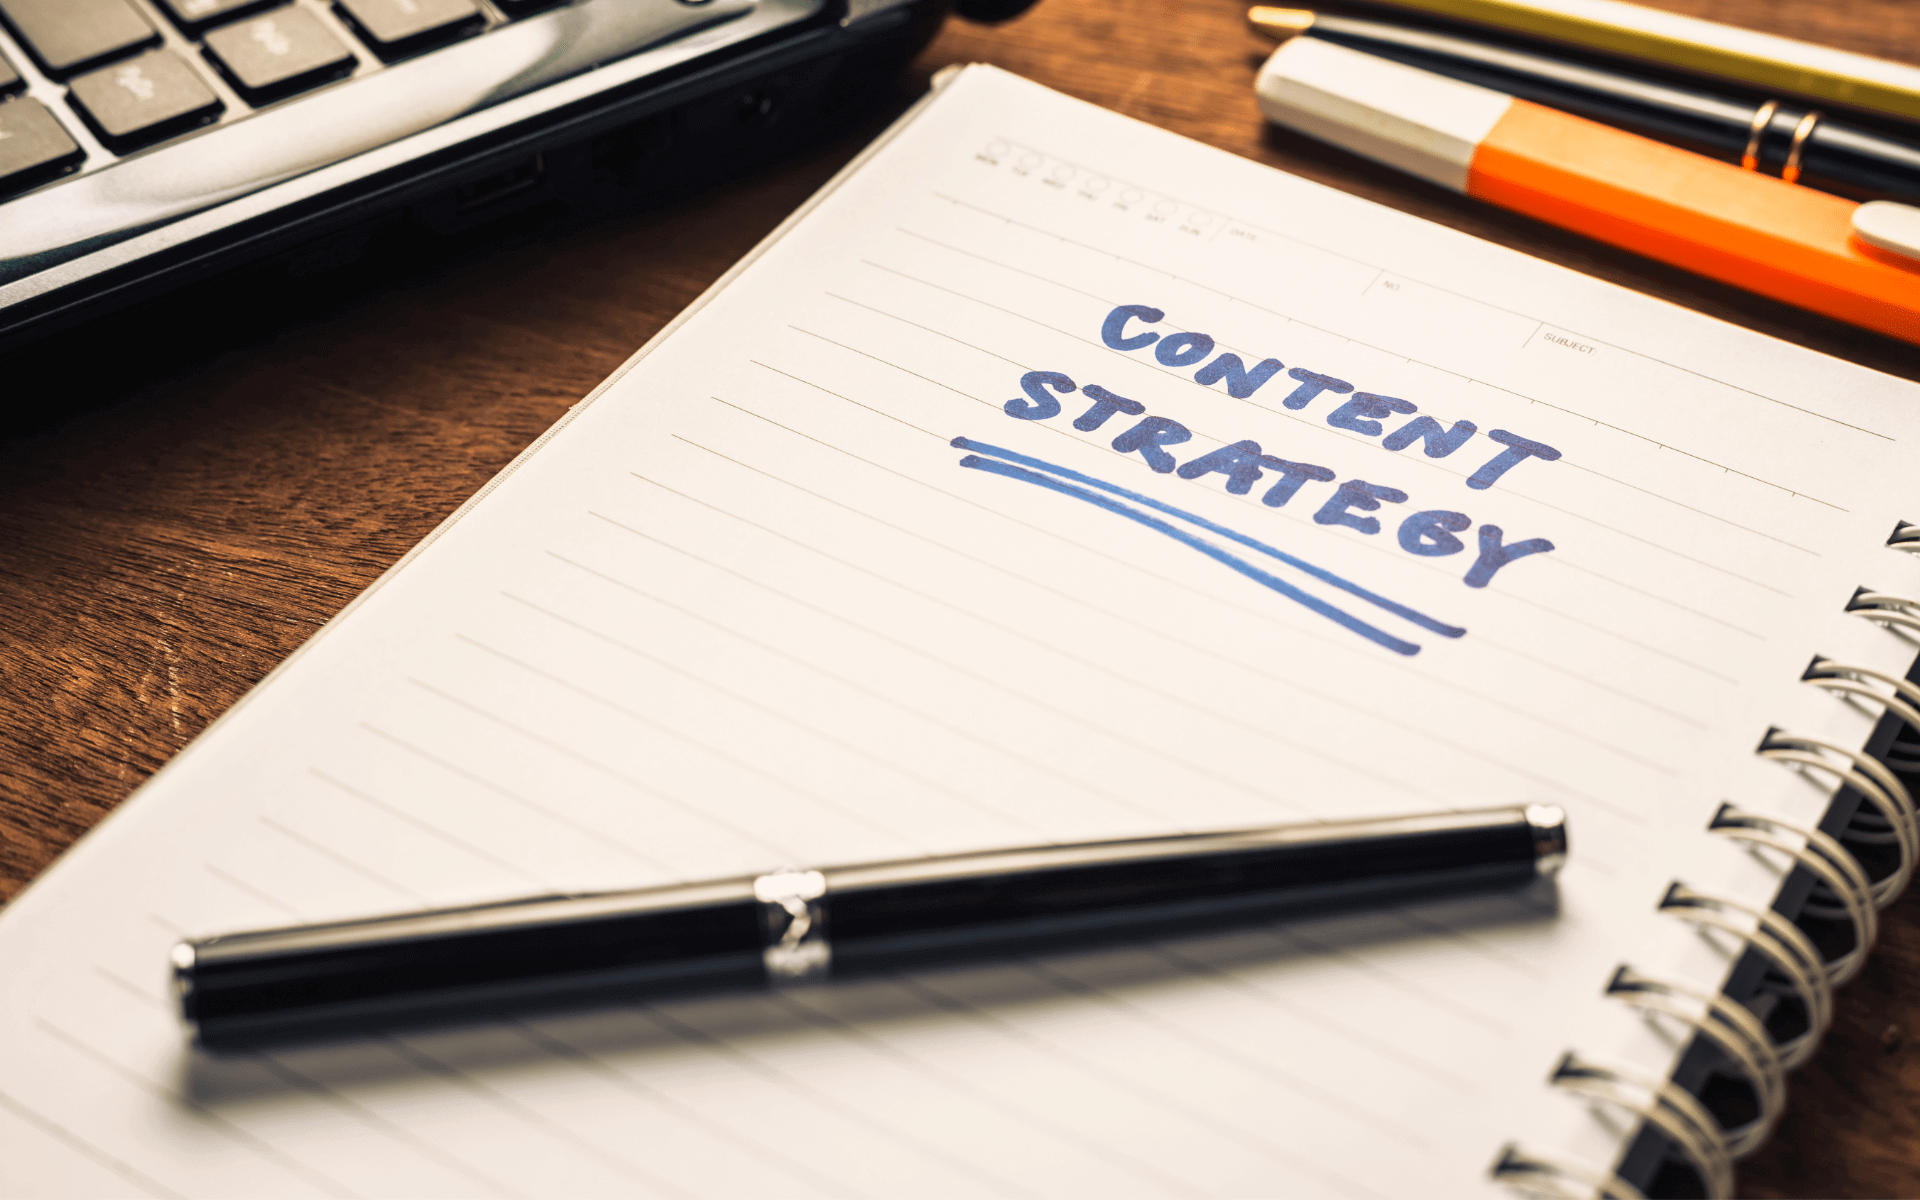 A content strategy outlined in a notebook created by a marketing company